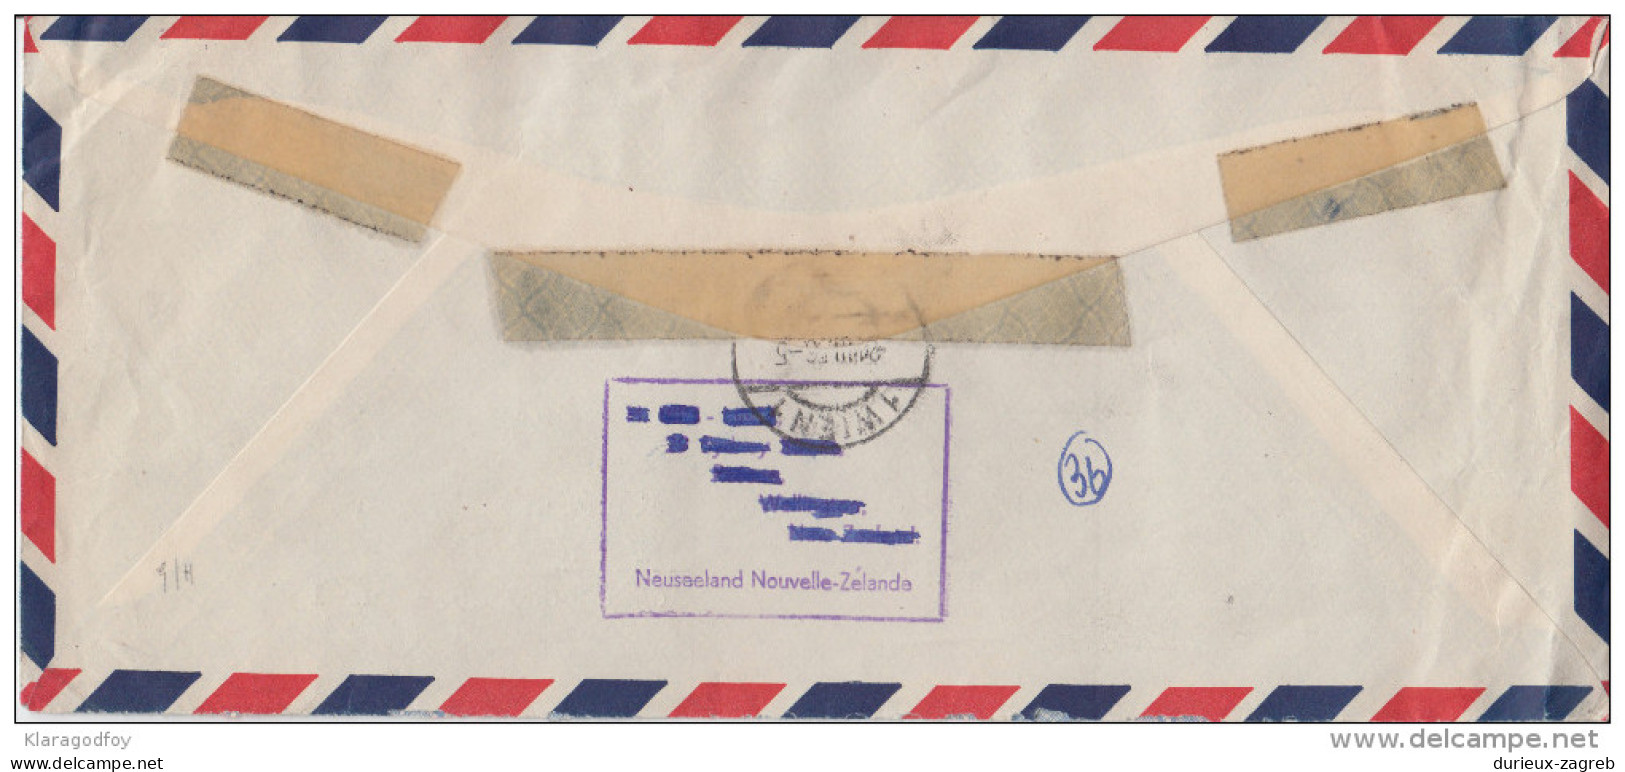 New Zealand Nice Air Mail Letter Cover Travelled To Austria 1956 B160711 - Cartas & Documentos